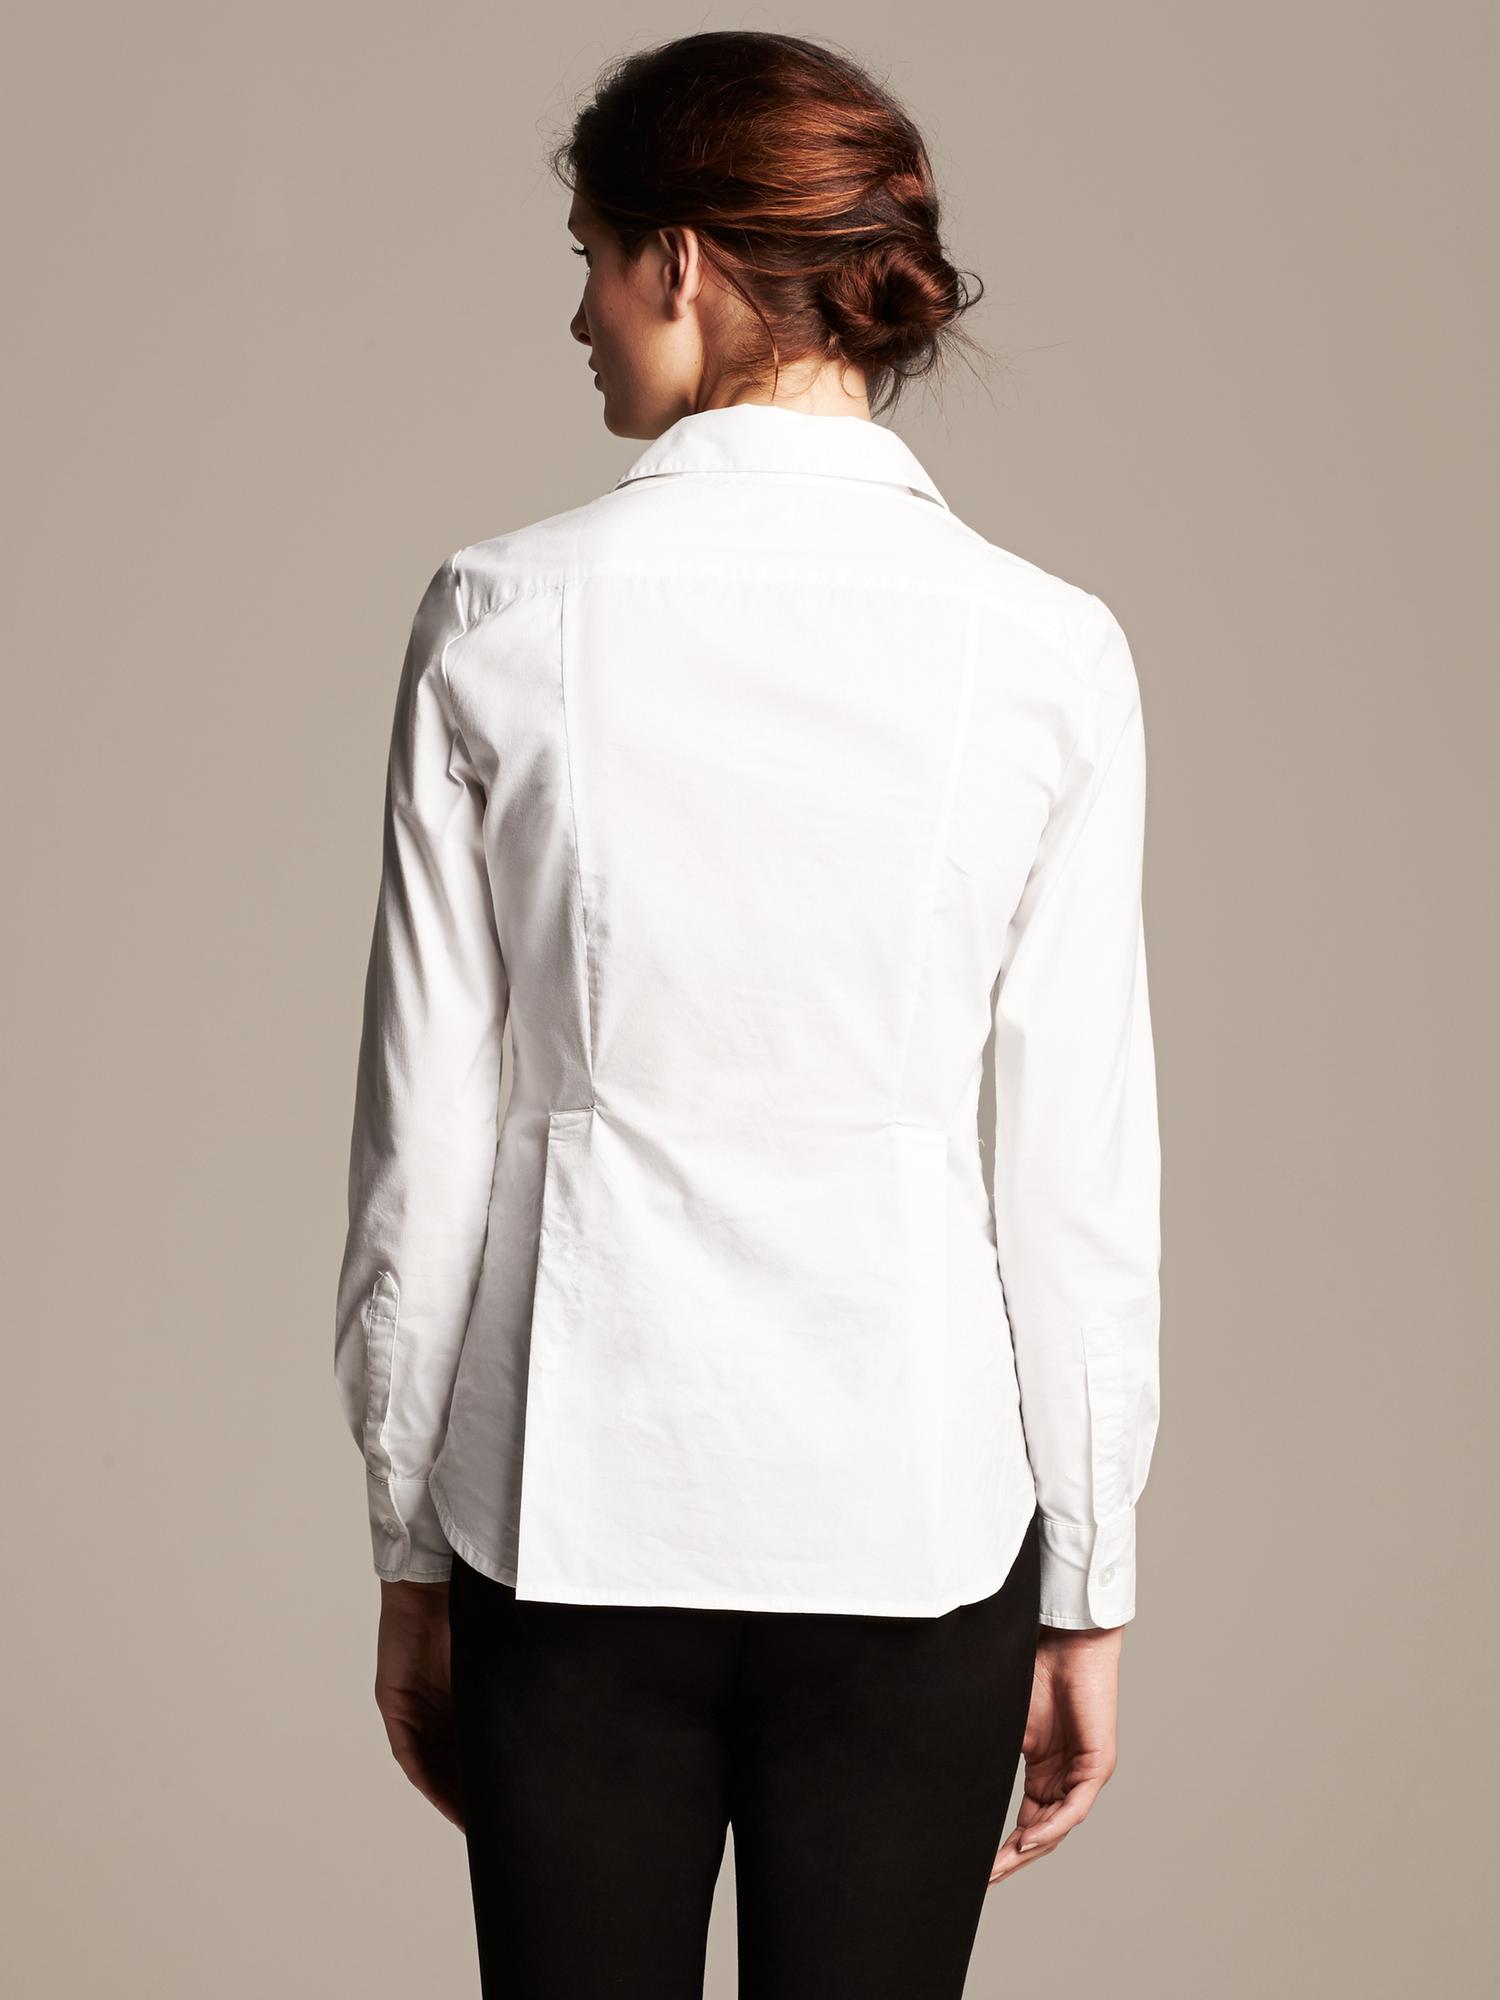 Roland Mouret Collection White Button-Front Shirt